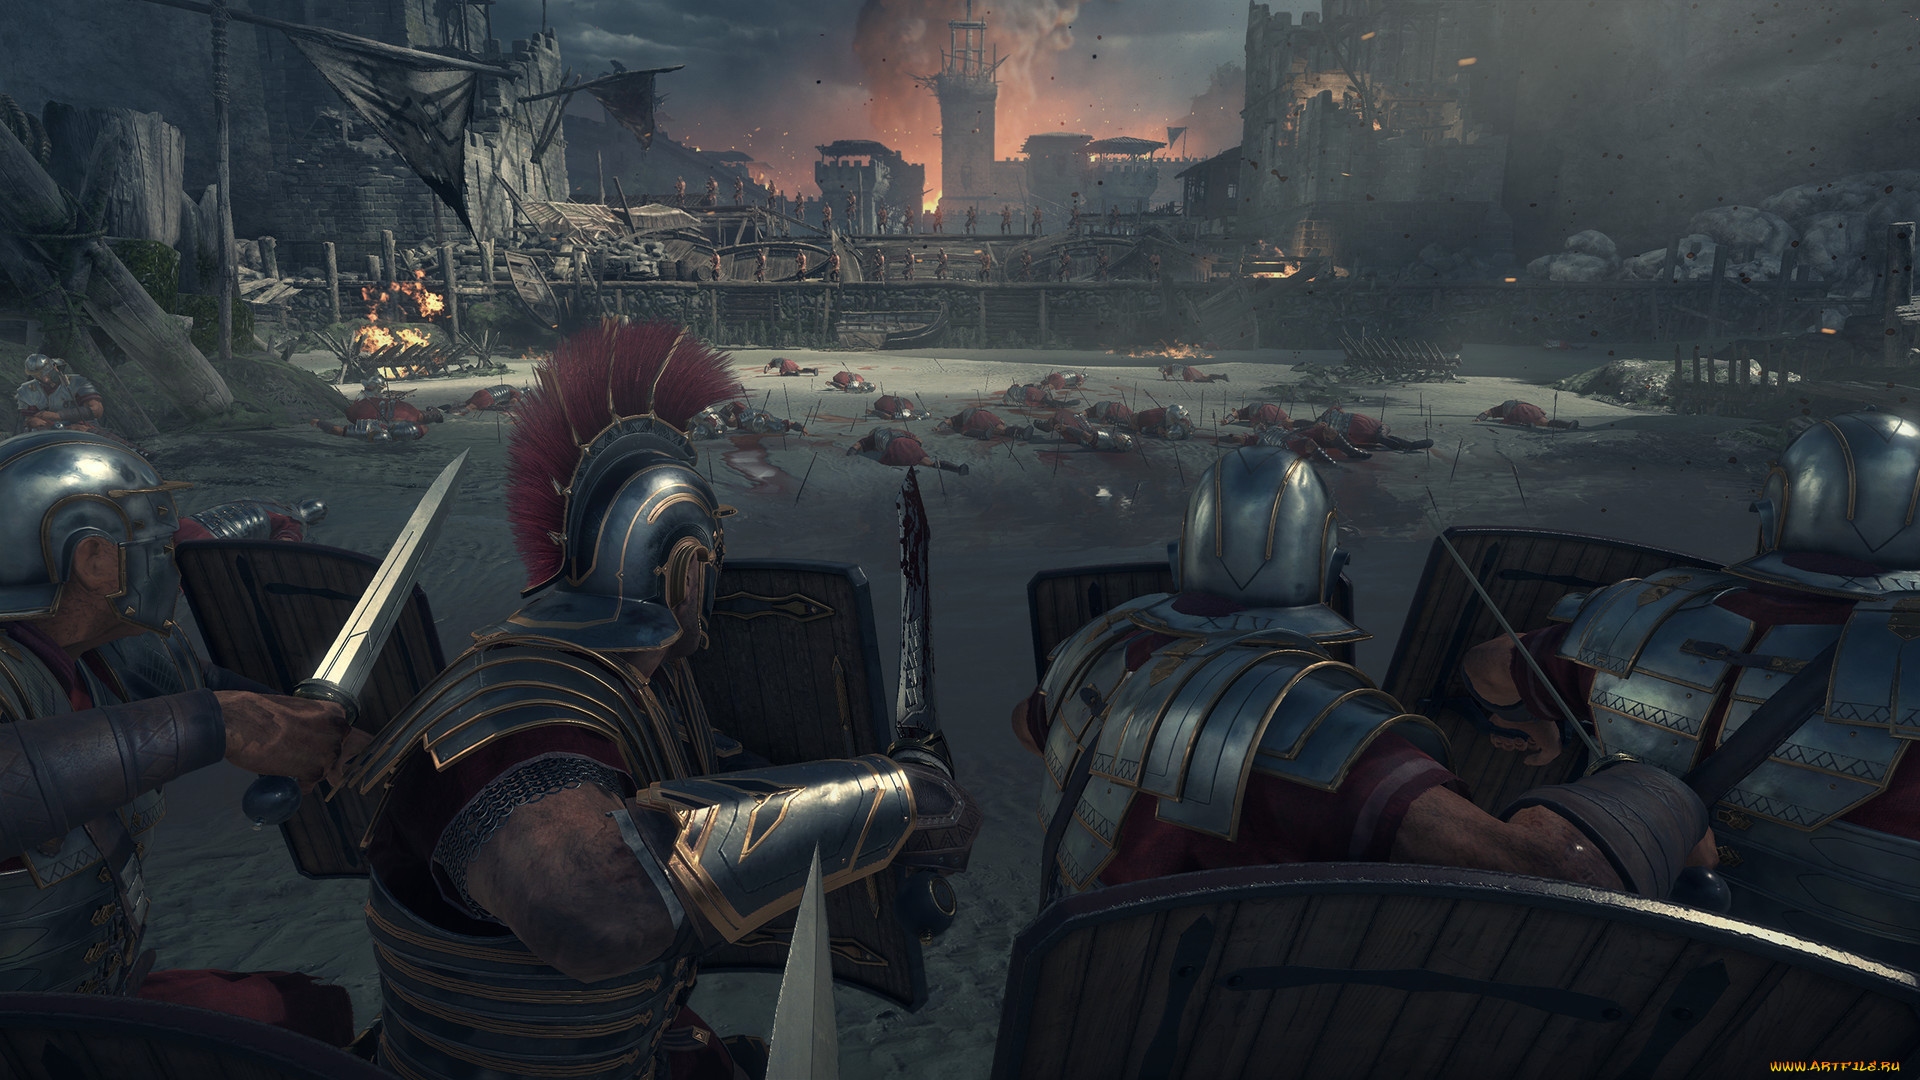  , ryse,  son of rome, son, of, rome, , , 